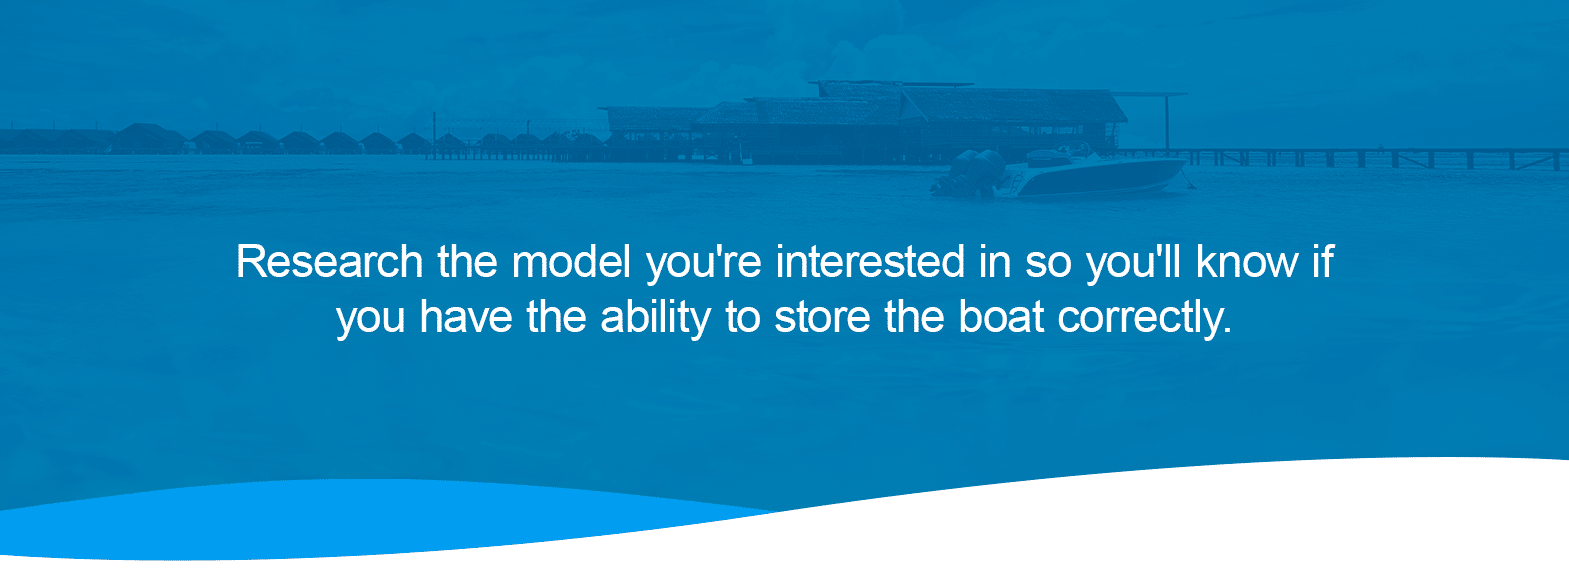 Where Do You Plan to Store the Boat? Research the model you're interested in so you'll know if you have the ability to store the boat correctly. 